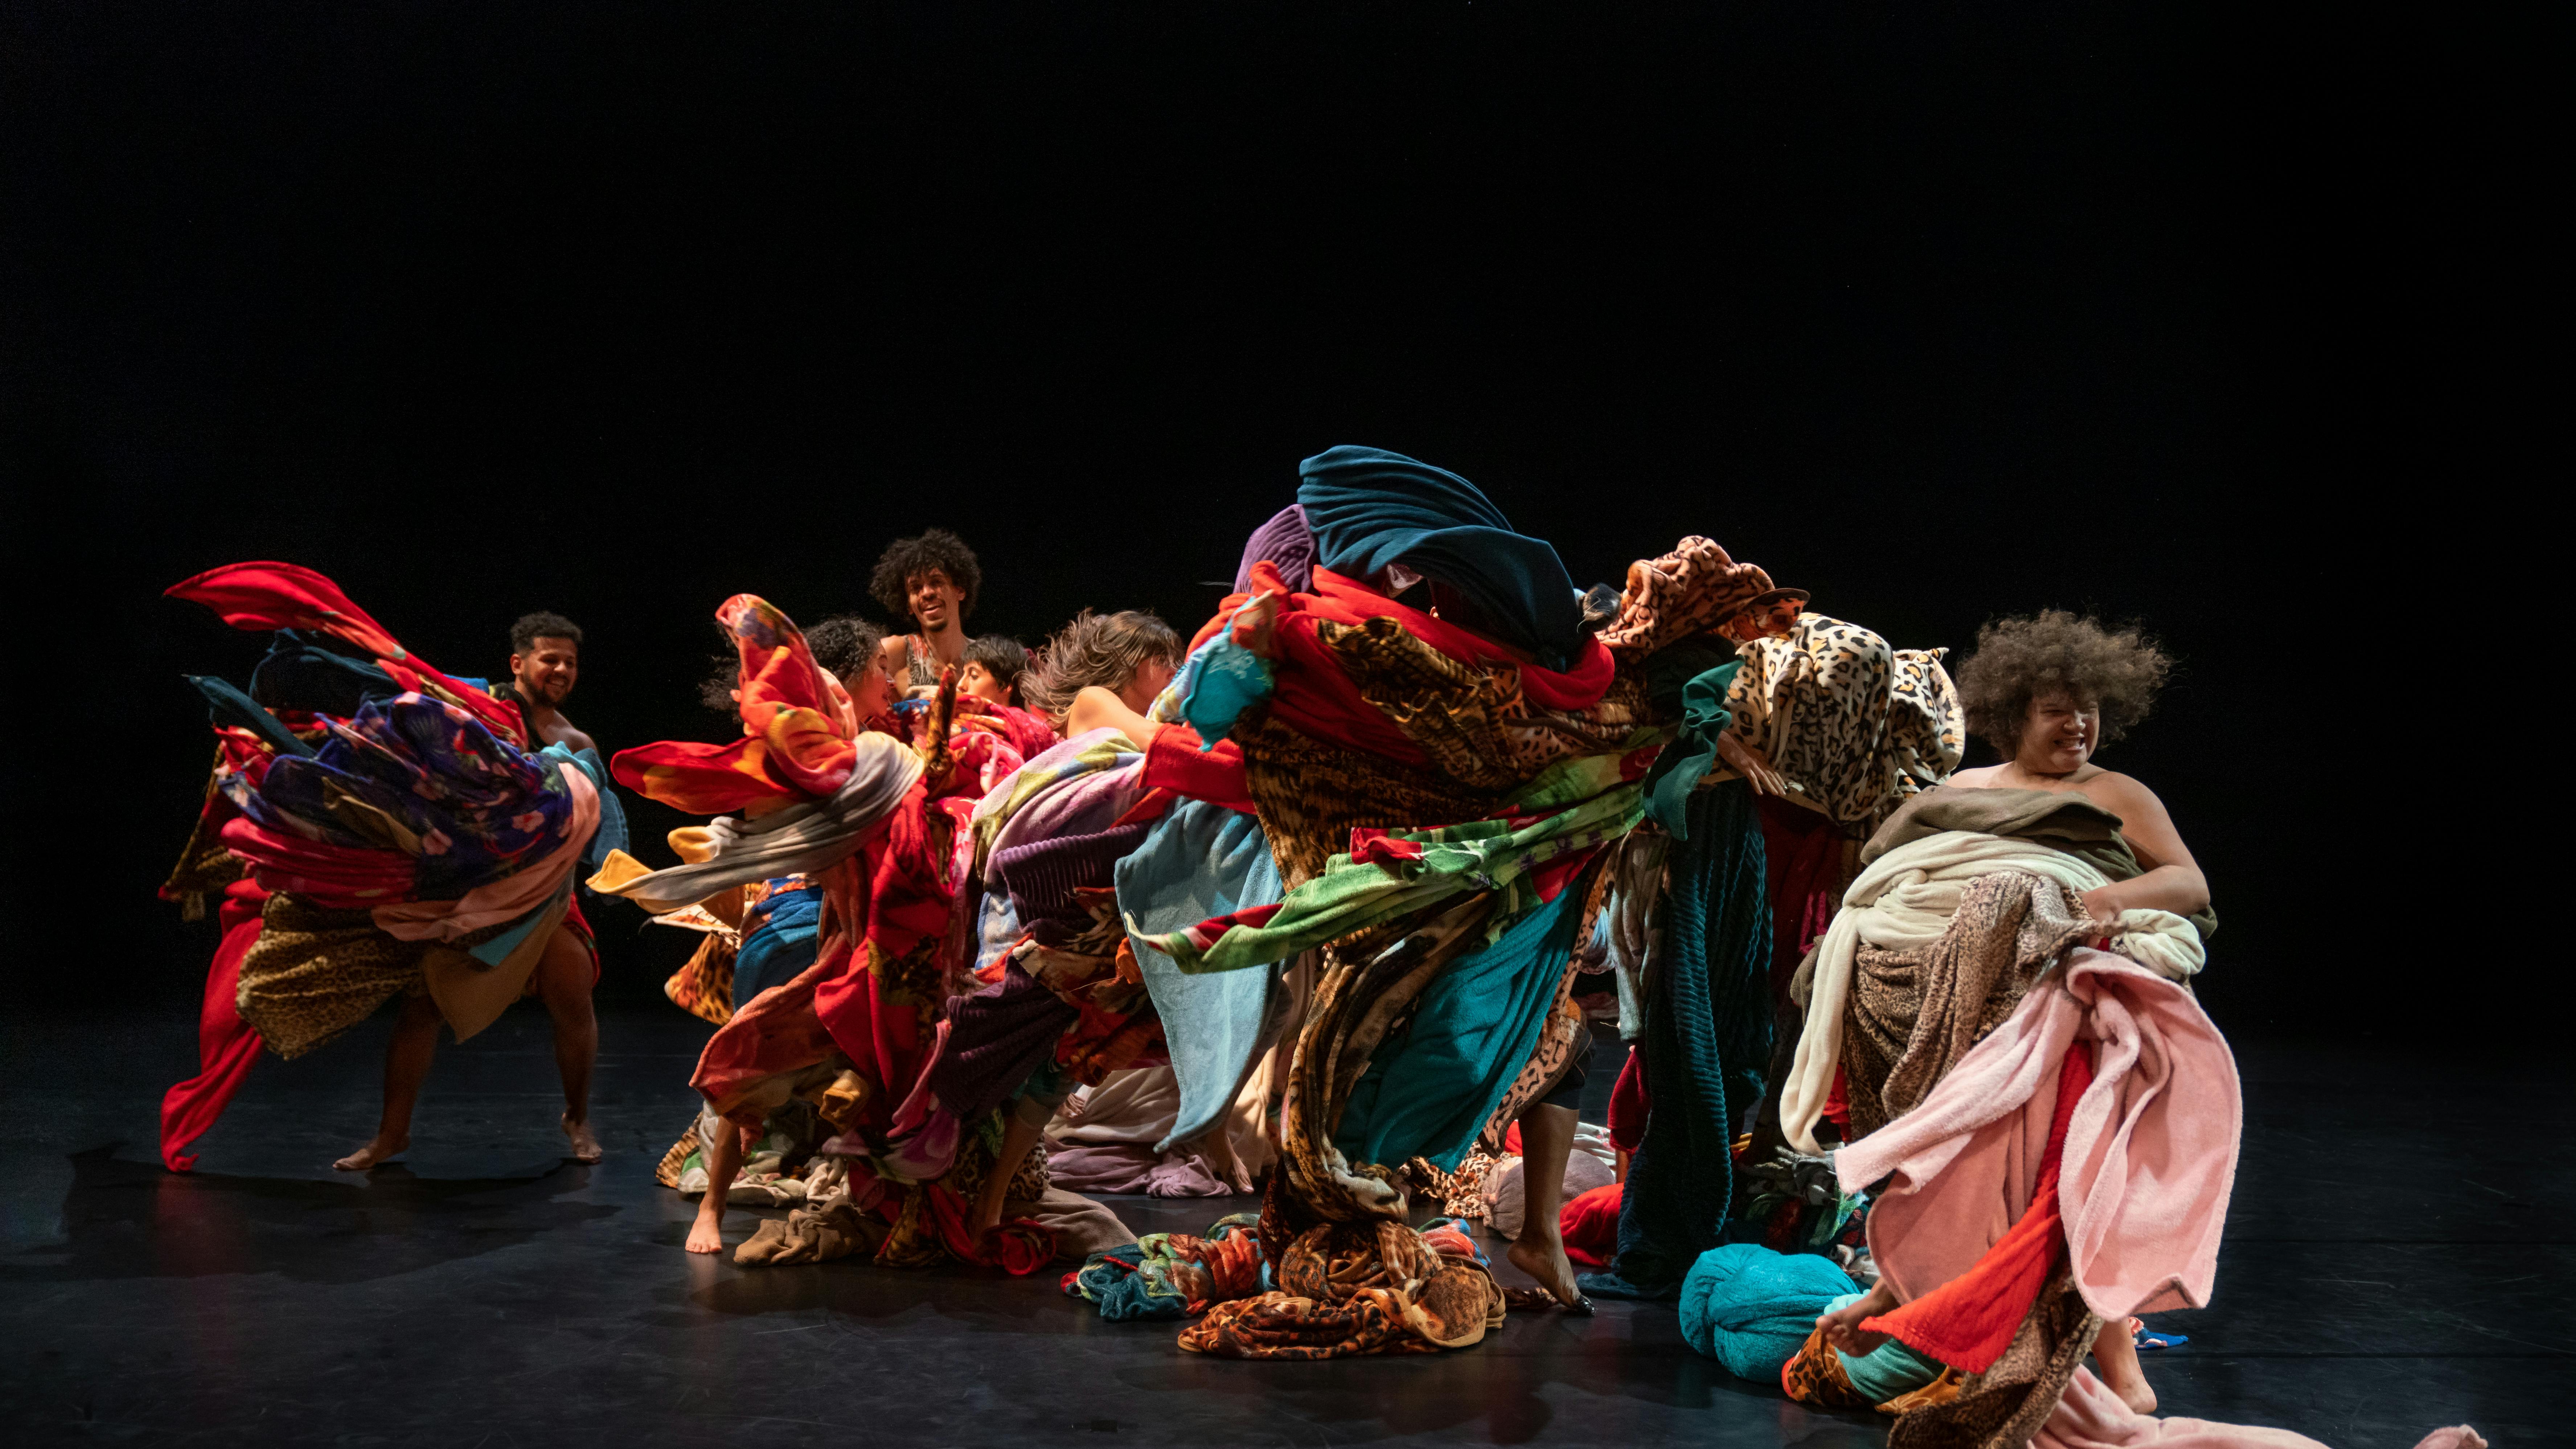 Dancers on a dark background wrapped in many coloured fabrics